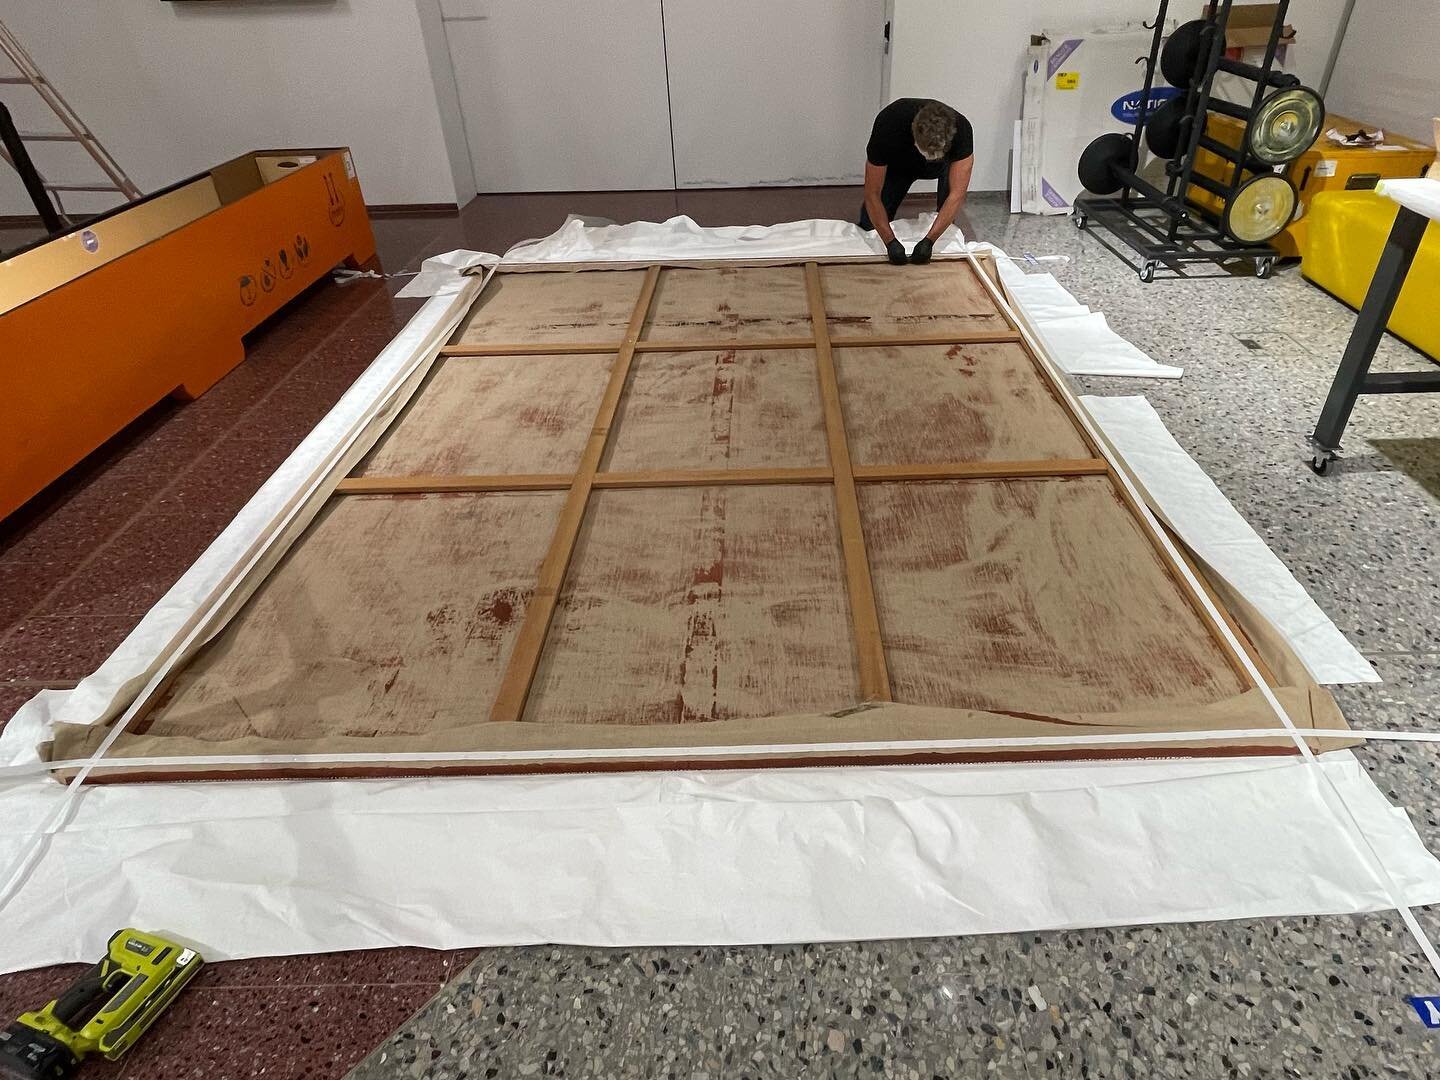 Stretching oversized canvas is our thing! Last week we stretched two works from the NMA collection, both are significant objects in our shared global cultural history. They were both painted in the early 70&rsquo;s in Papunya, where circle and dot pa